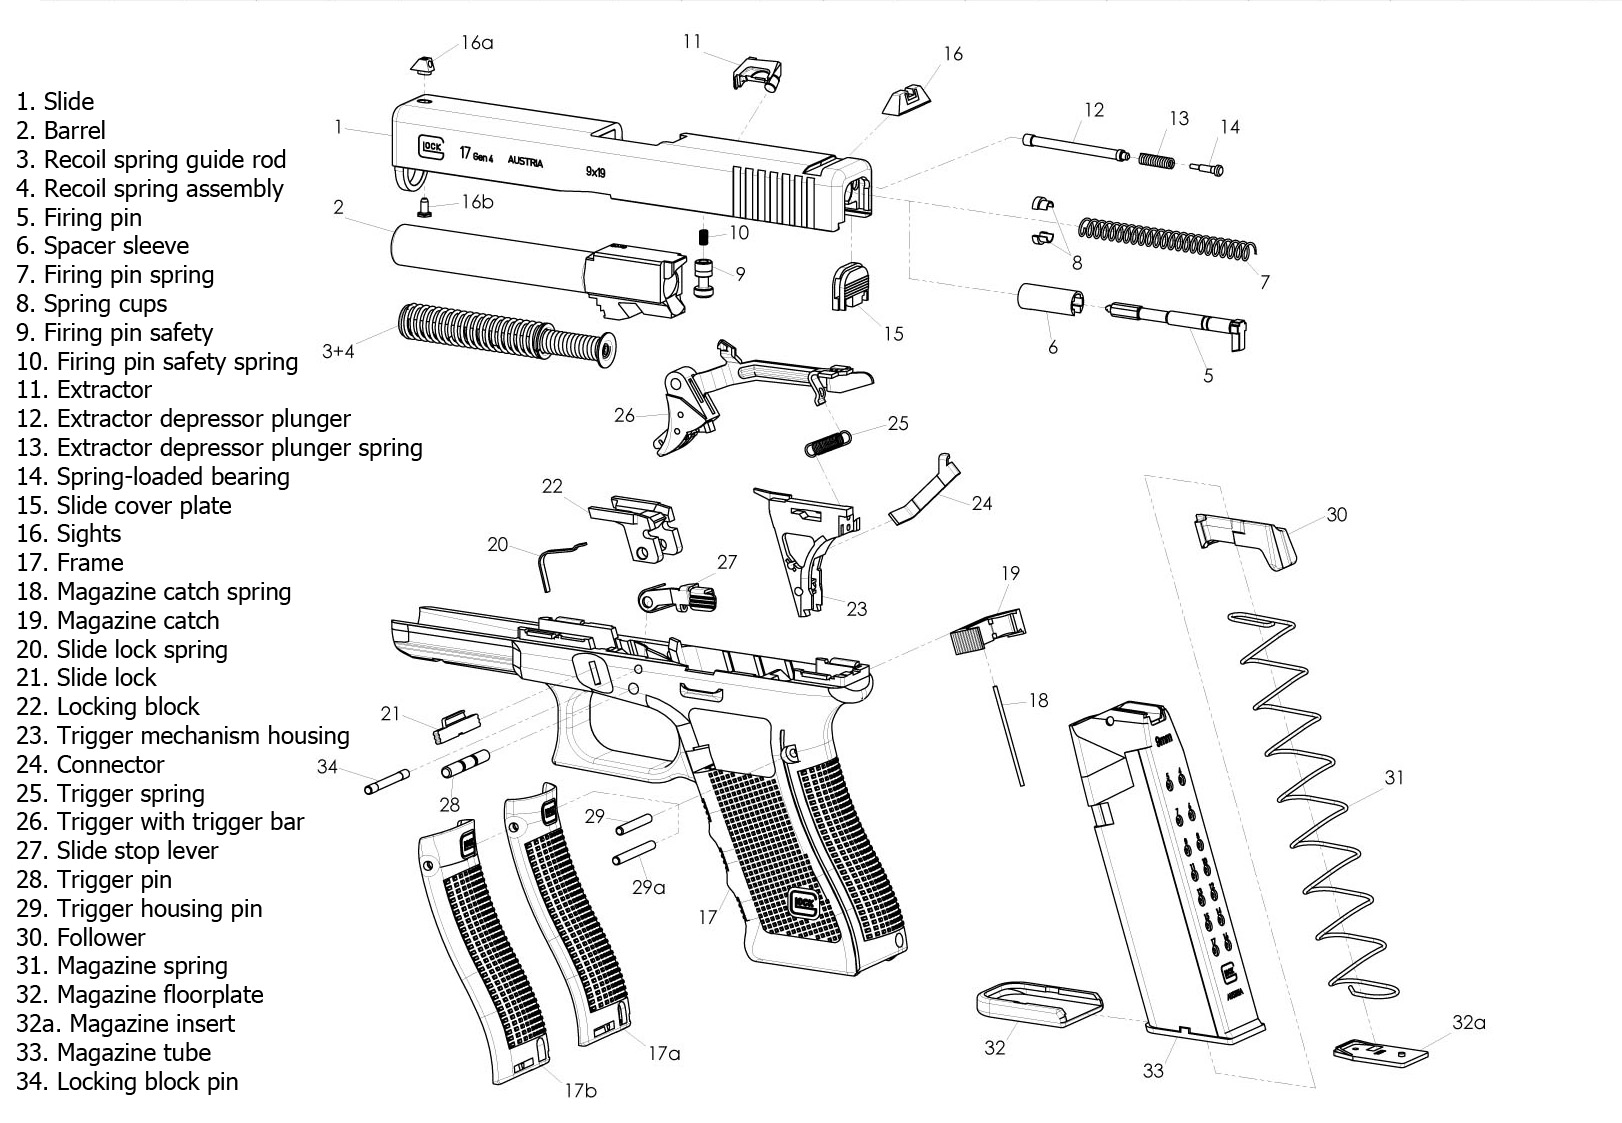 G17-Gen4-Exploded-View-with-legend31.jpg